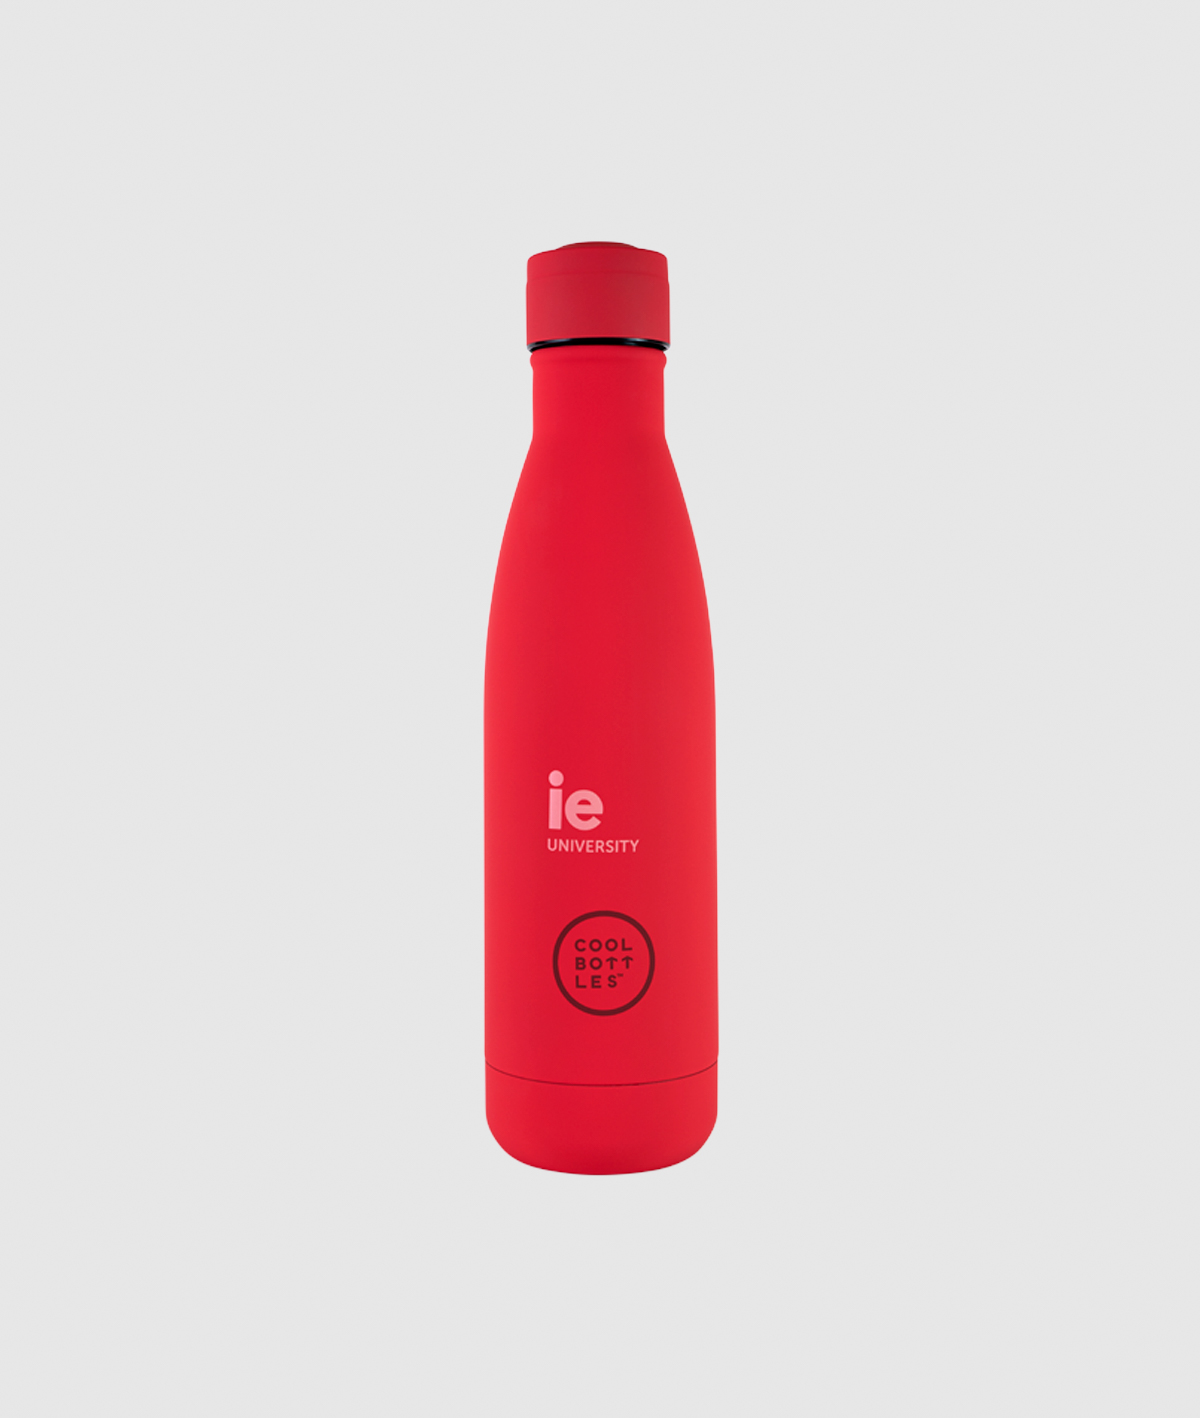 IEU Diversity Limited edition Cool Bottle. red colour back